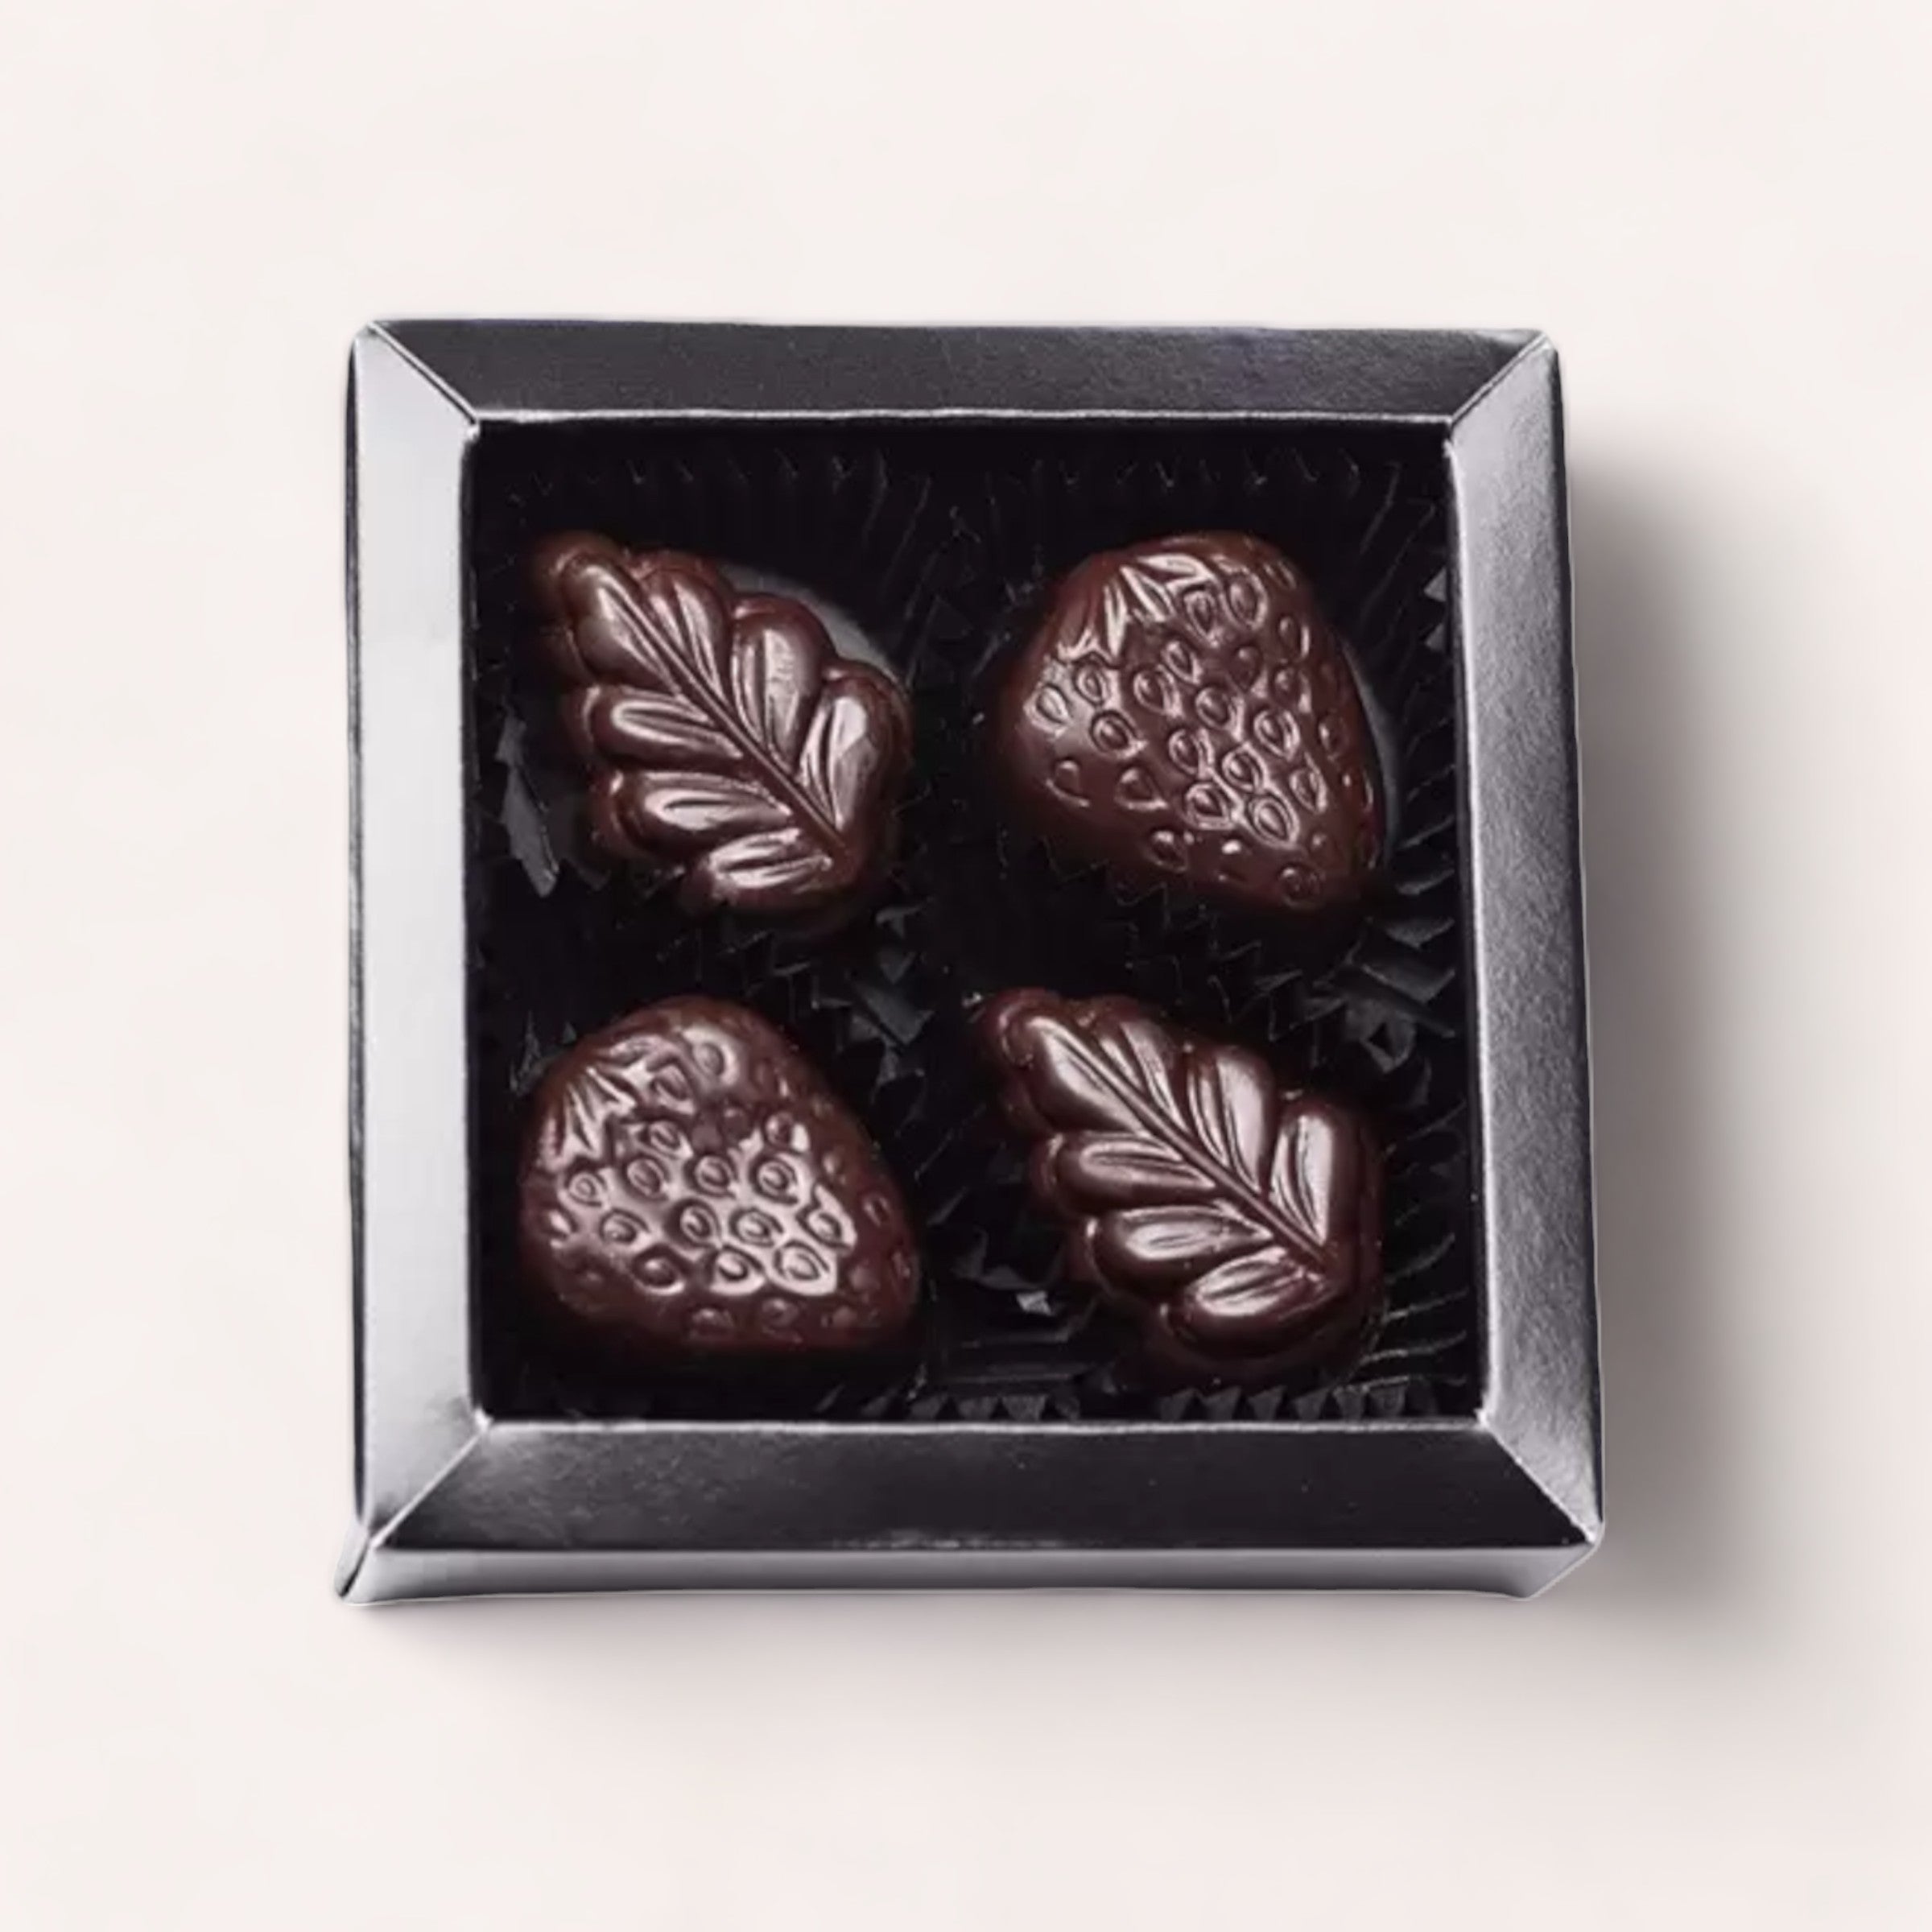 A gift box of 4 Piece Chocolate Box by Chocolate Traders, featuring artisan truffles with elegant leaf and peppermint designs, presented in a luxurious dark package.